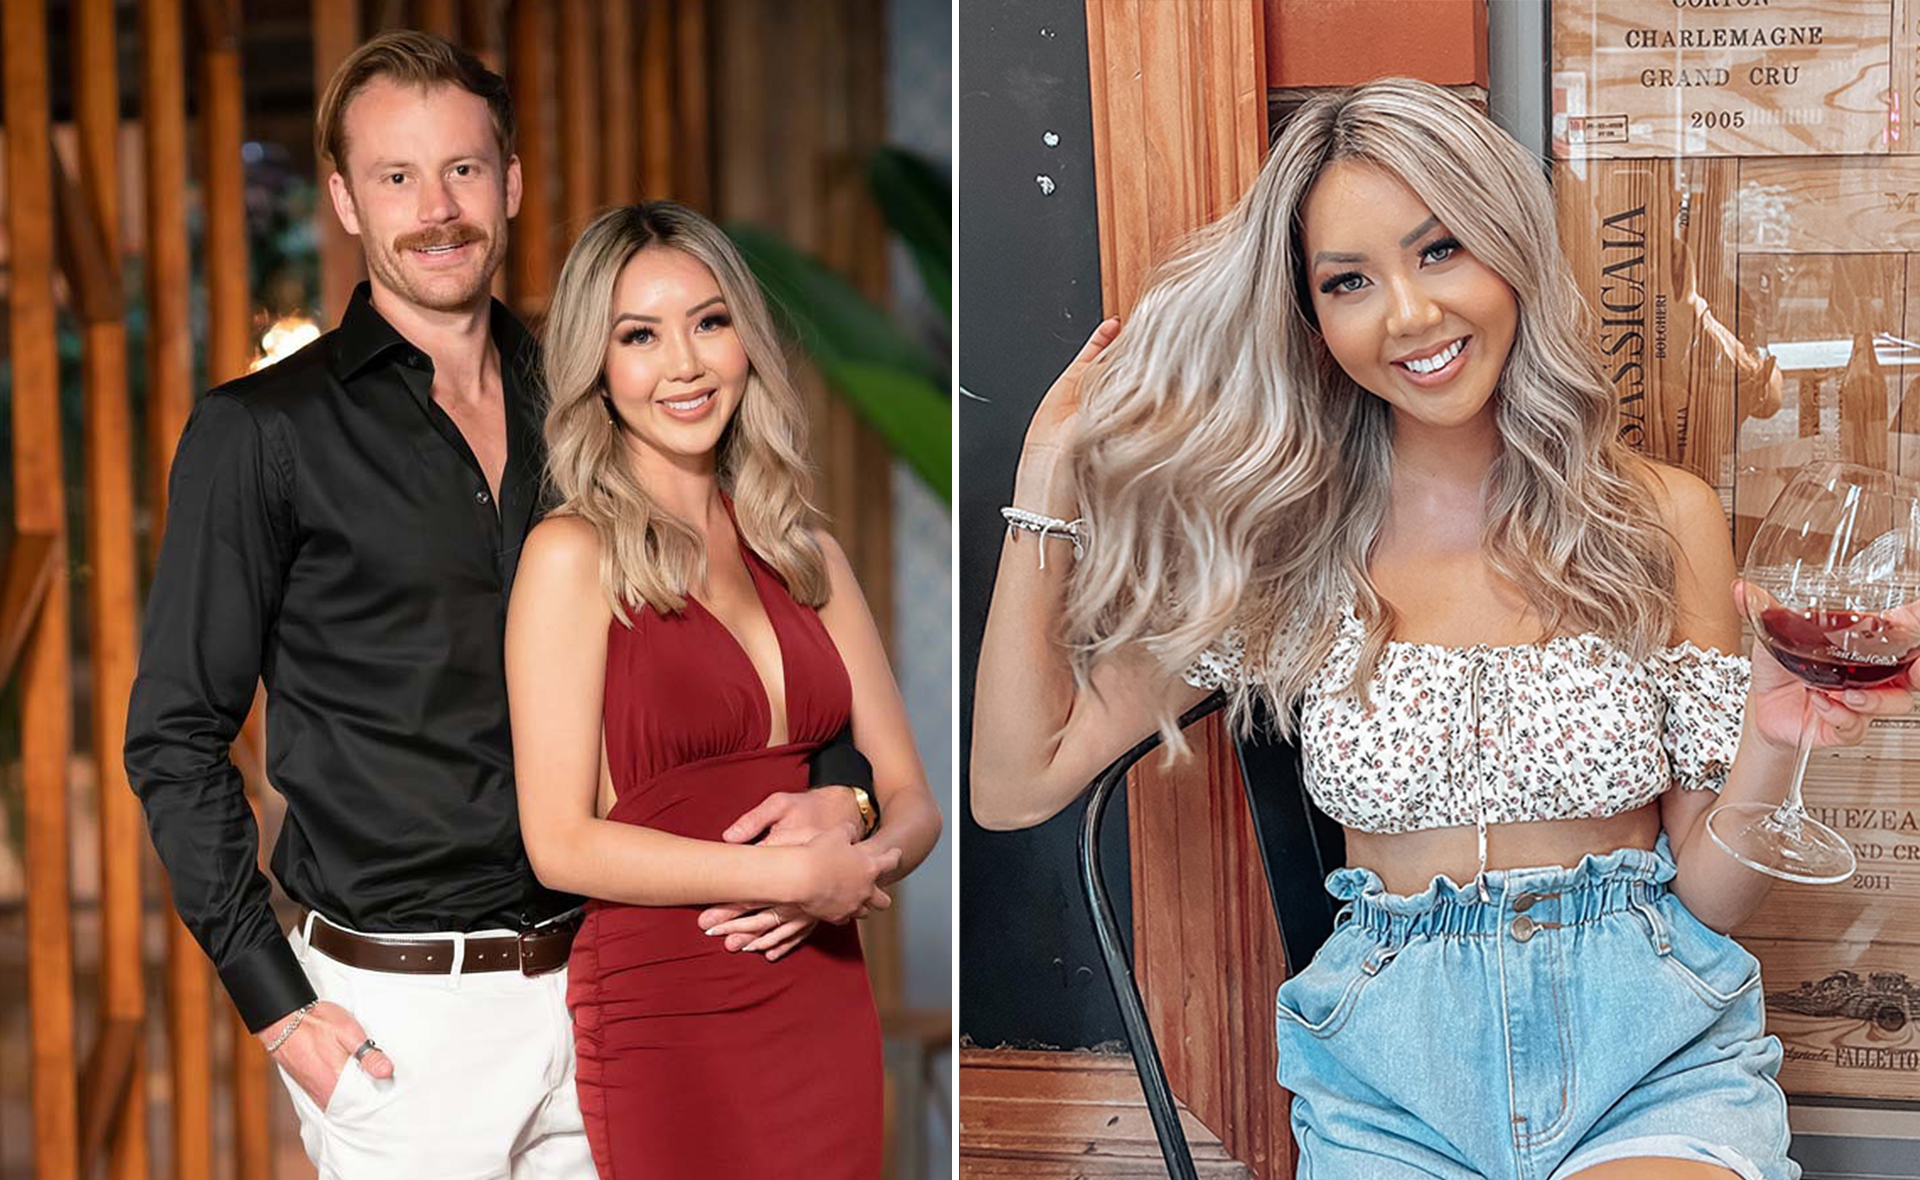 EXCLUSIVE: MAFS star Selina reveals how her husband Cody’s “upsetting” comments really made her feel